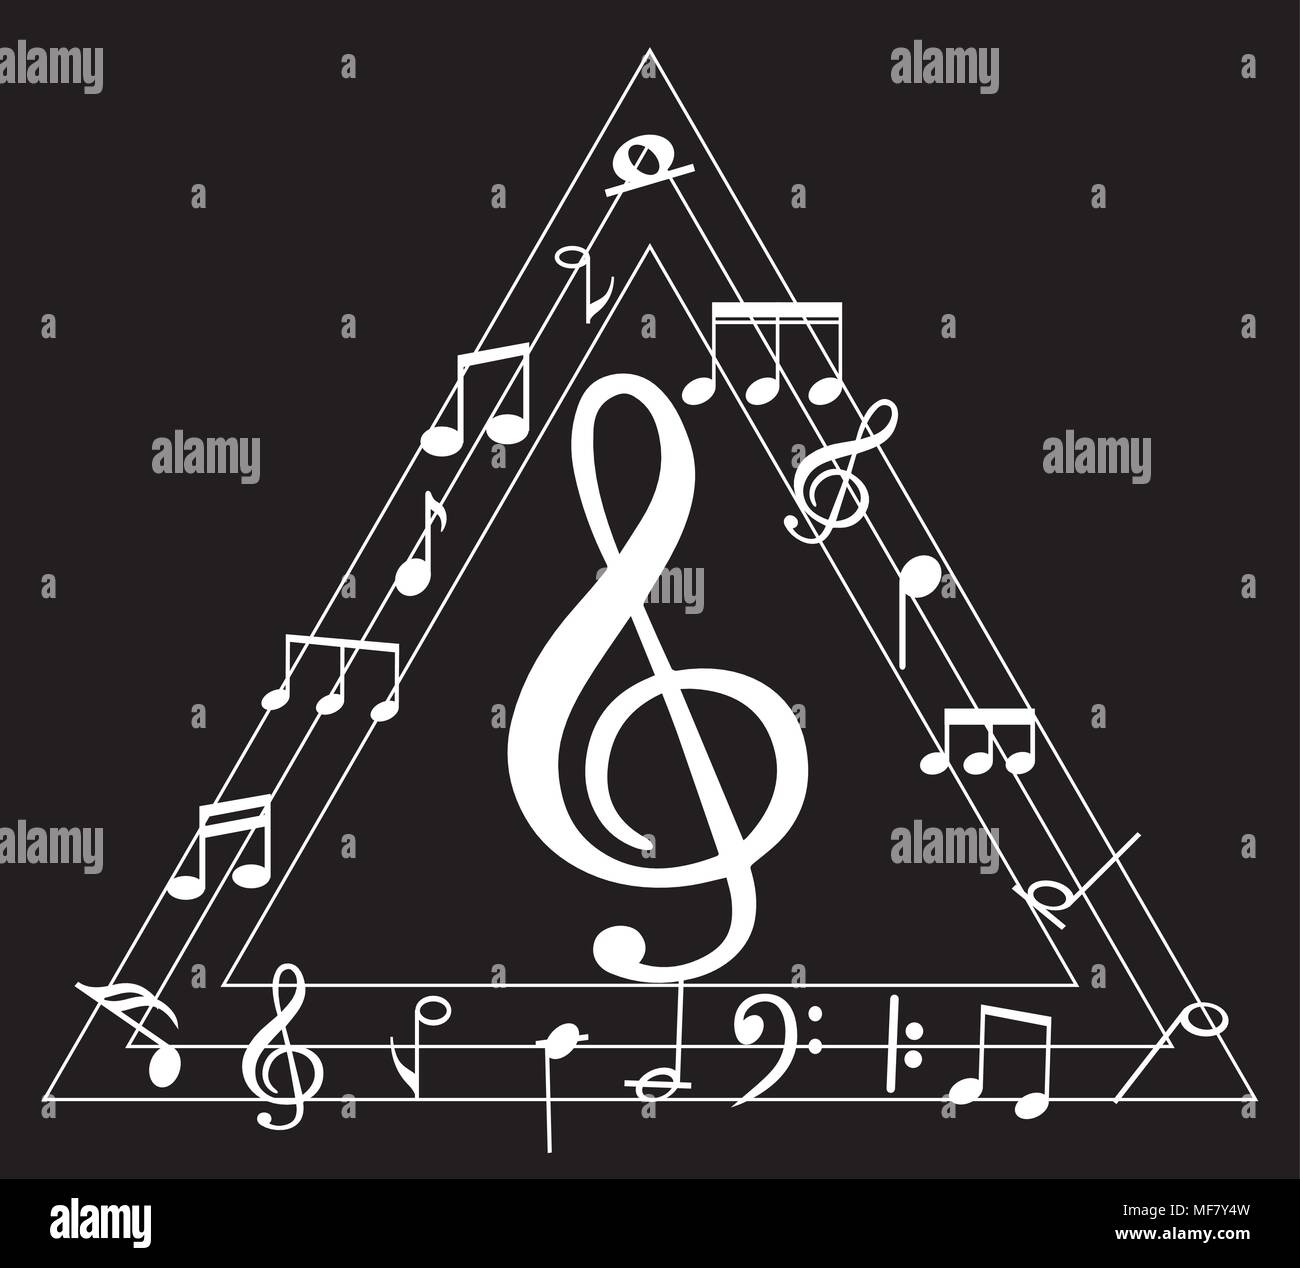 Music note background with different music symbols Stock Vector